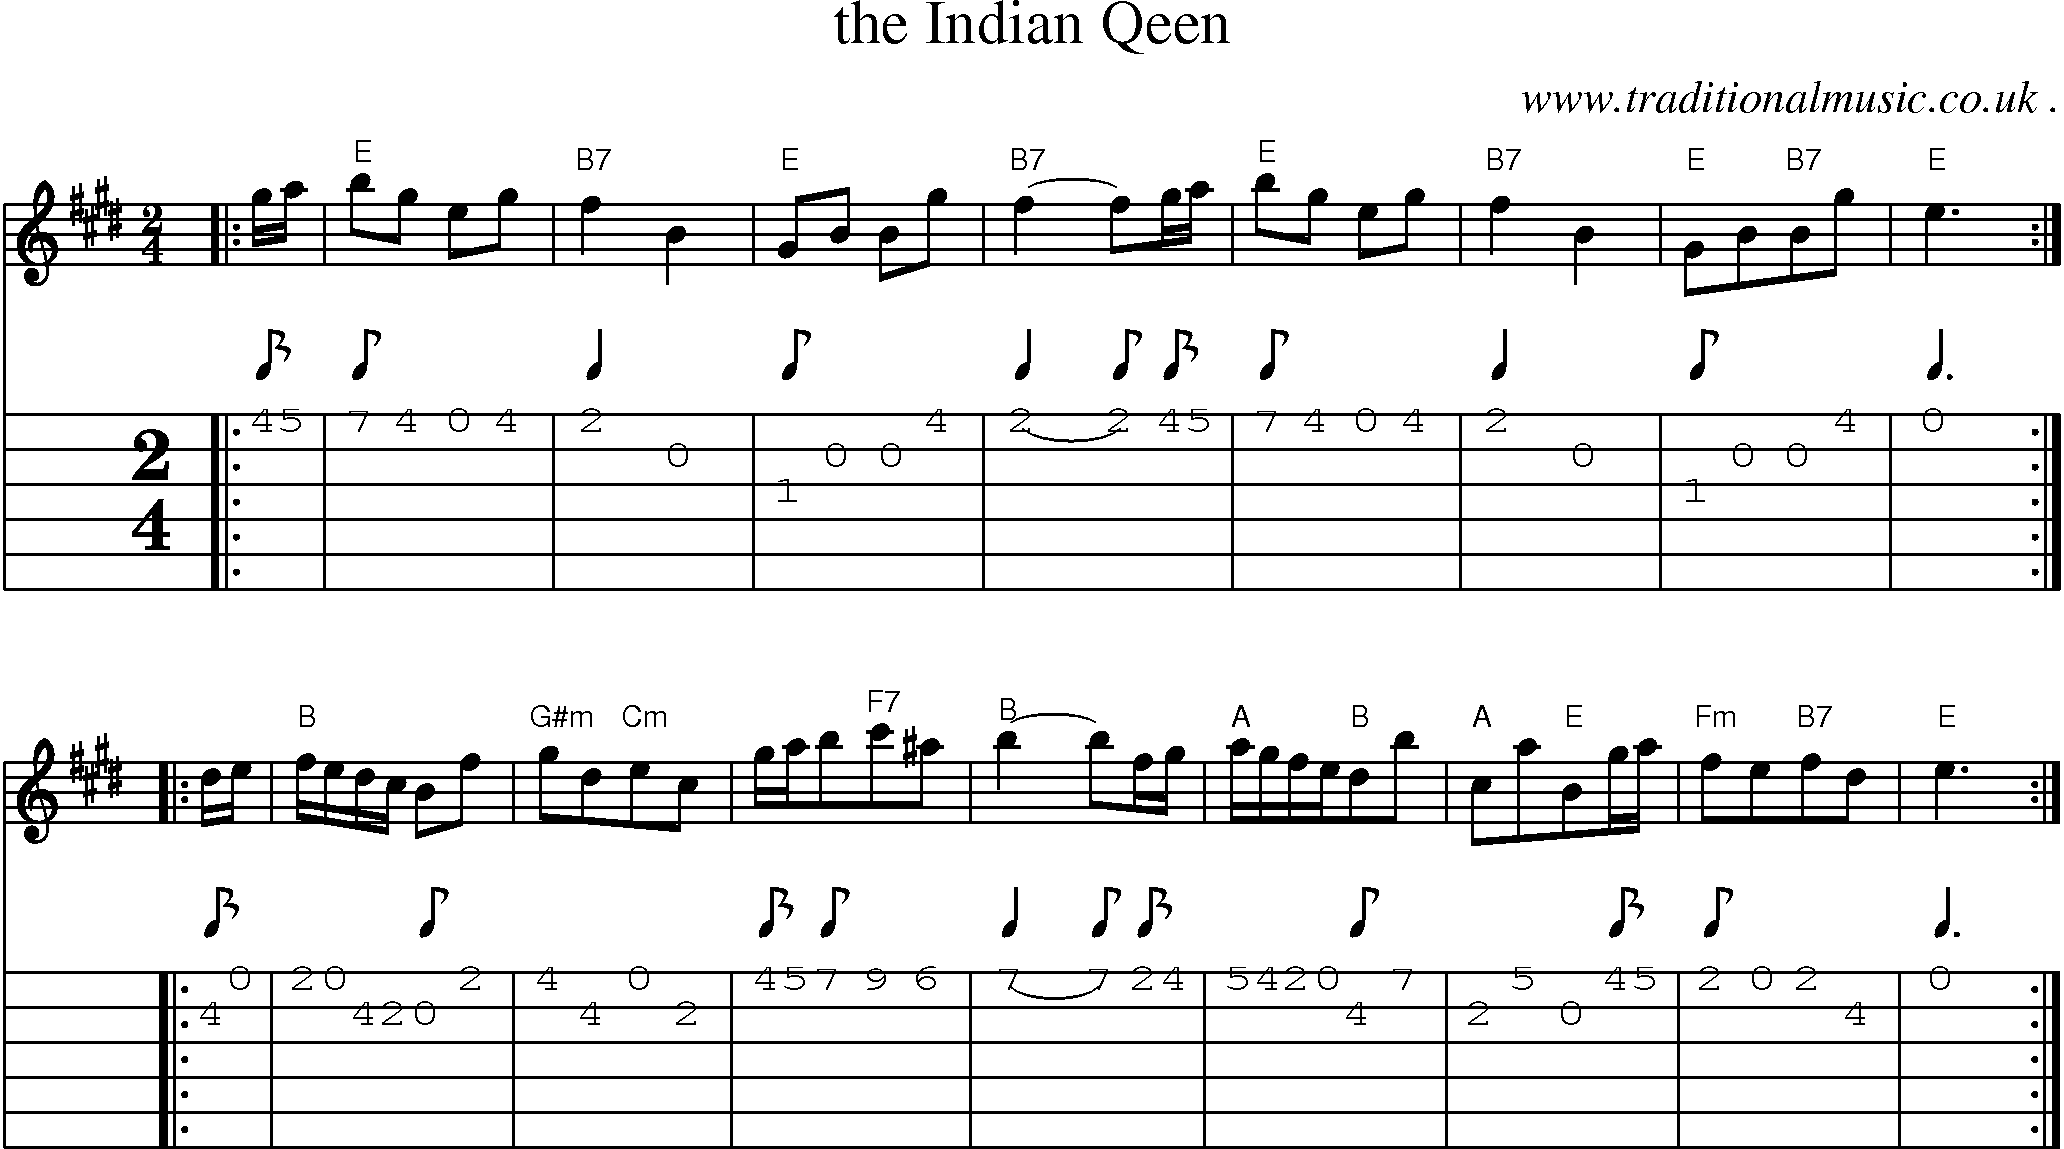 Sheet-Music and Guitar Tabs for The Indian Qeen